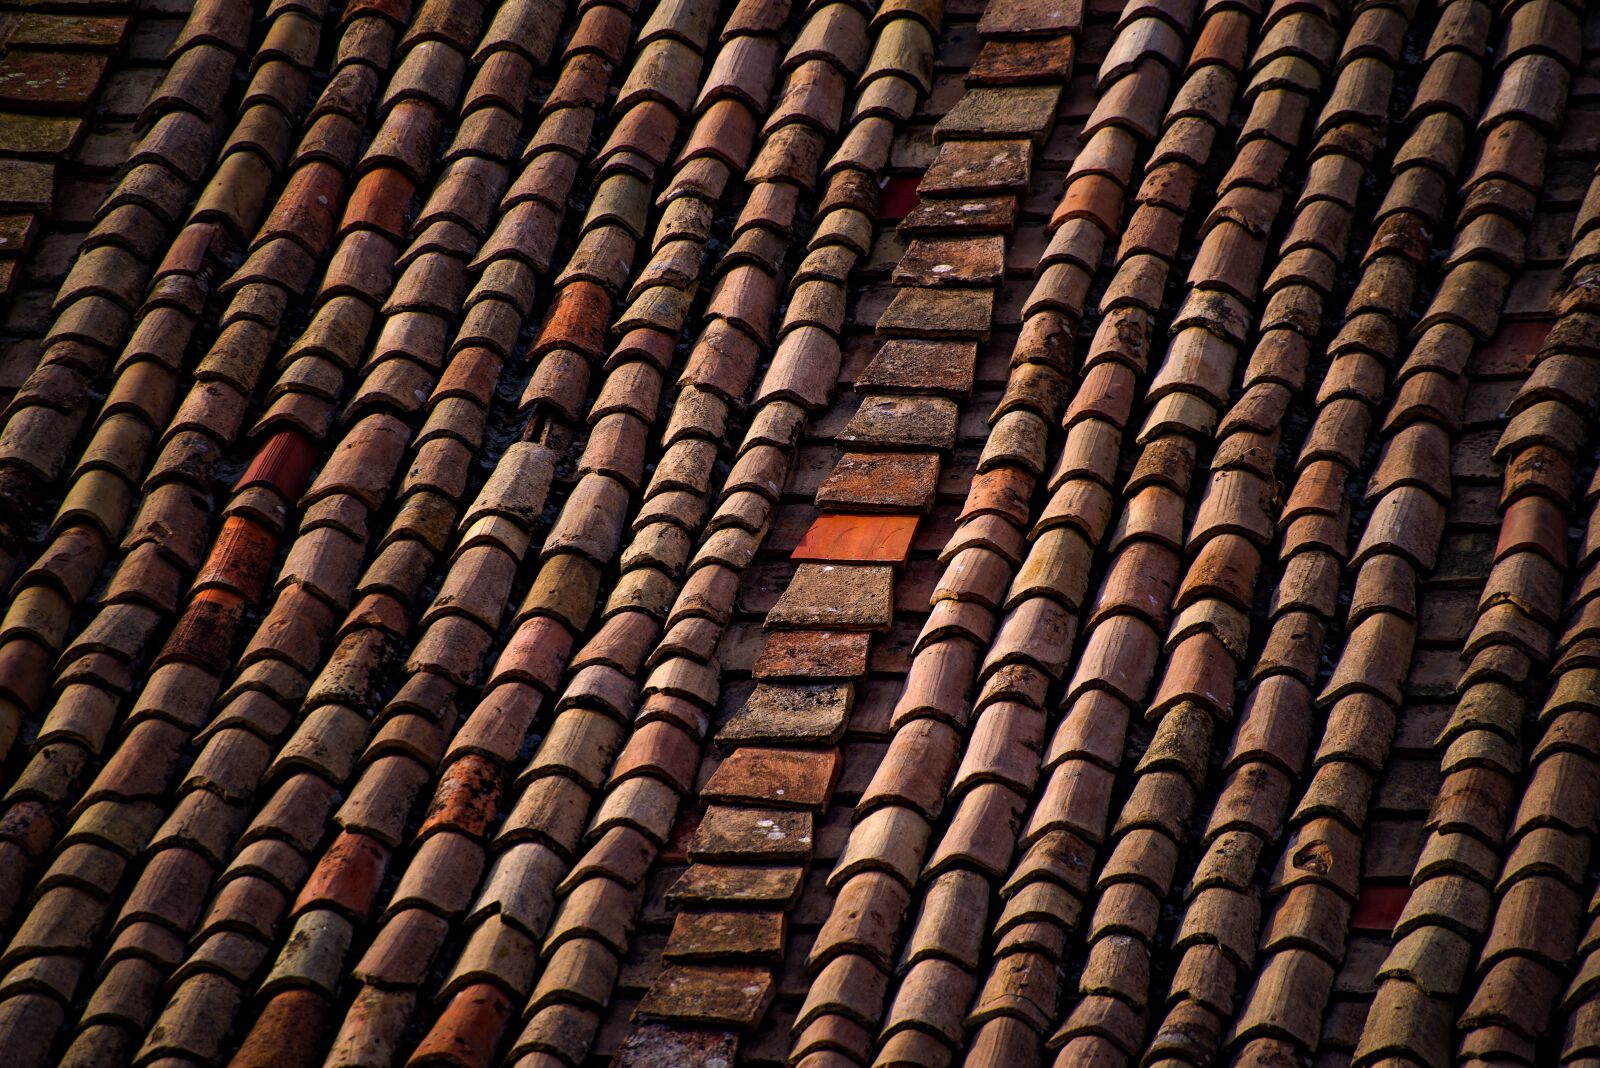 Pentax K-1 Mark II + Sigma sample photo. Roof, roofing, tiles photography